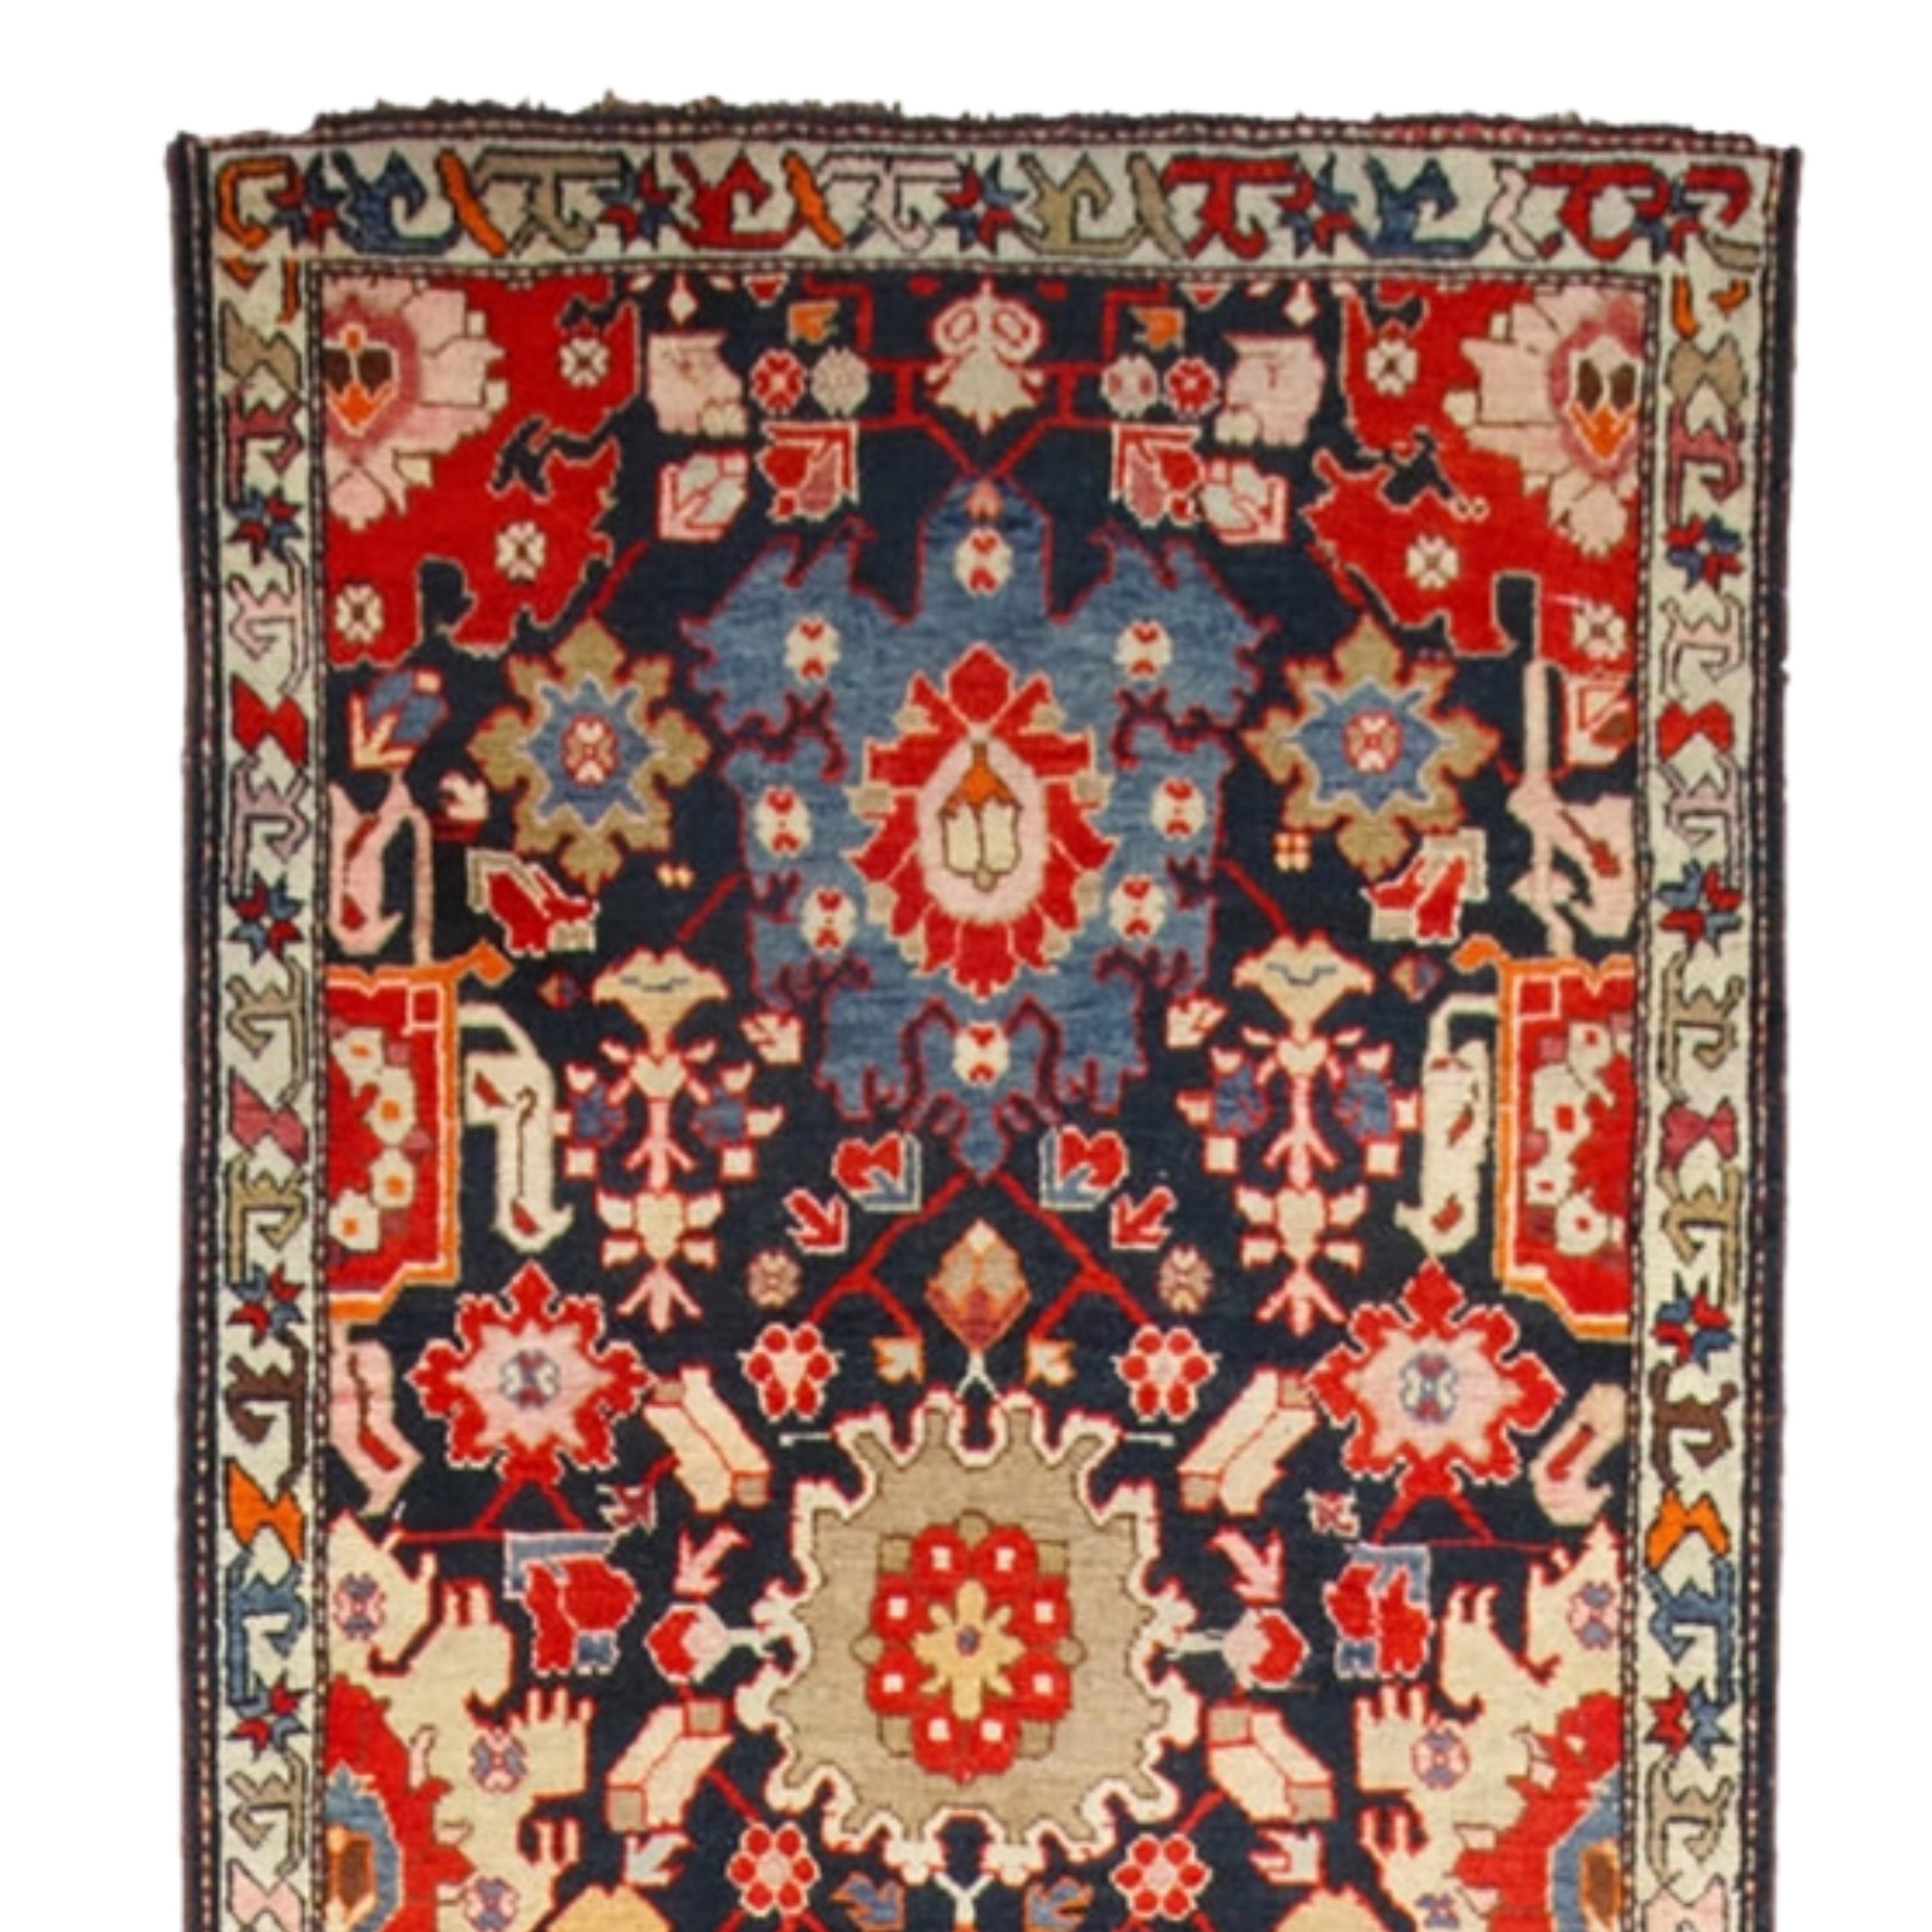 19th Century Karabag Runner
Size: 105x577 cm

This impressive 19th-century Karabakh Rug is a masterpiece reflecting the elegant and sophisticated craftsmanship of a historical period.

Rich Patterns: The runner is decorated with intricate floral